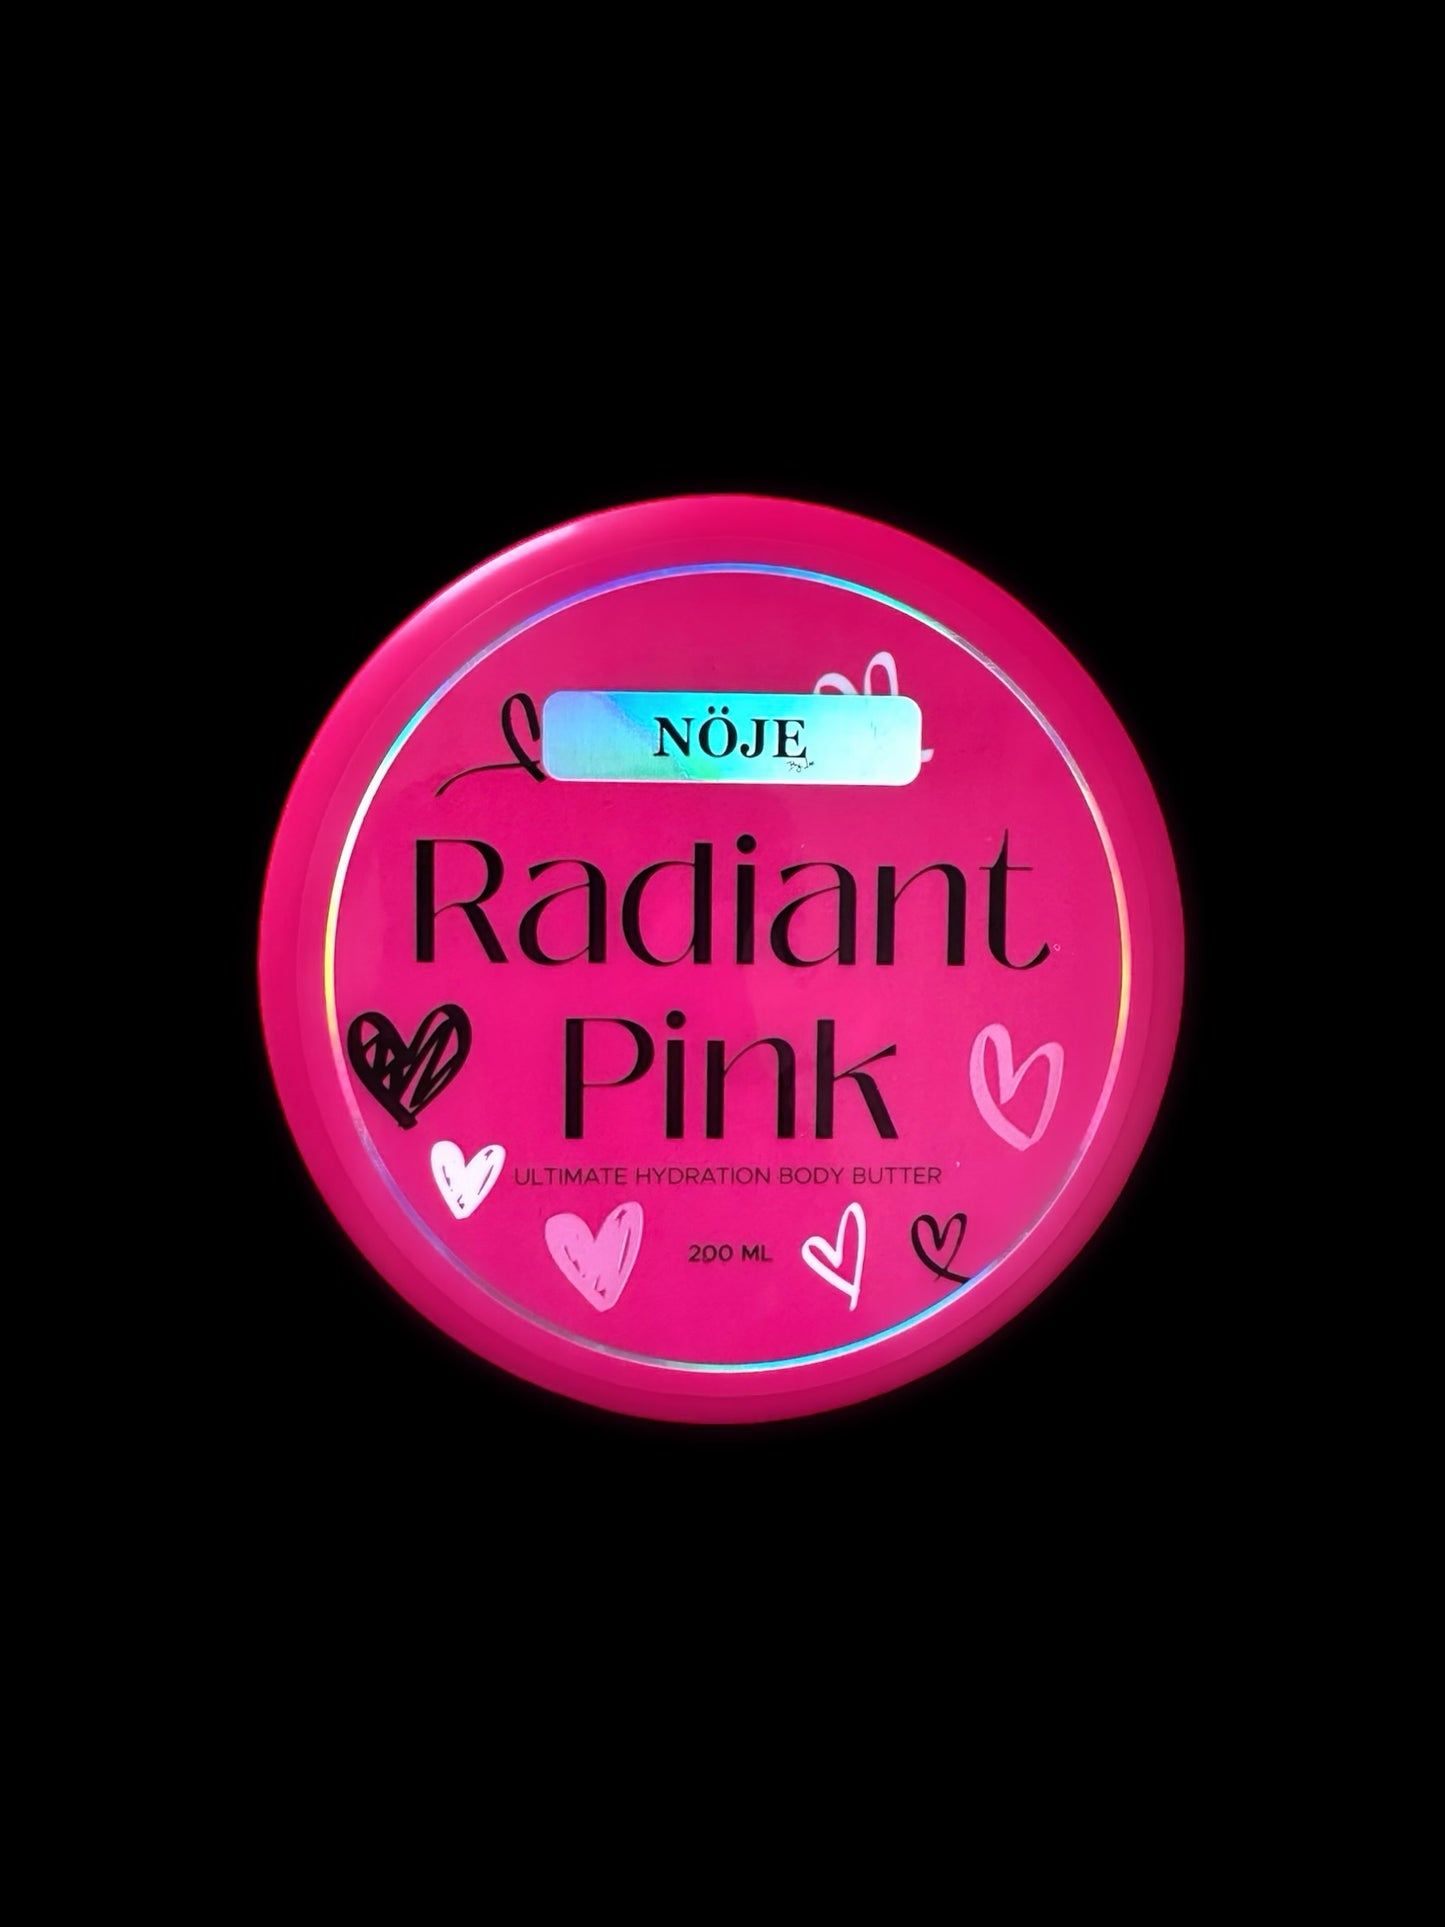 Radiant pink body butter